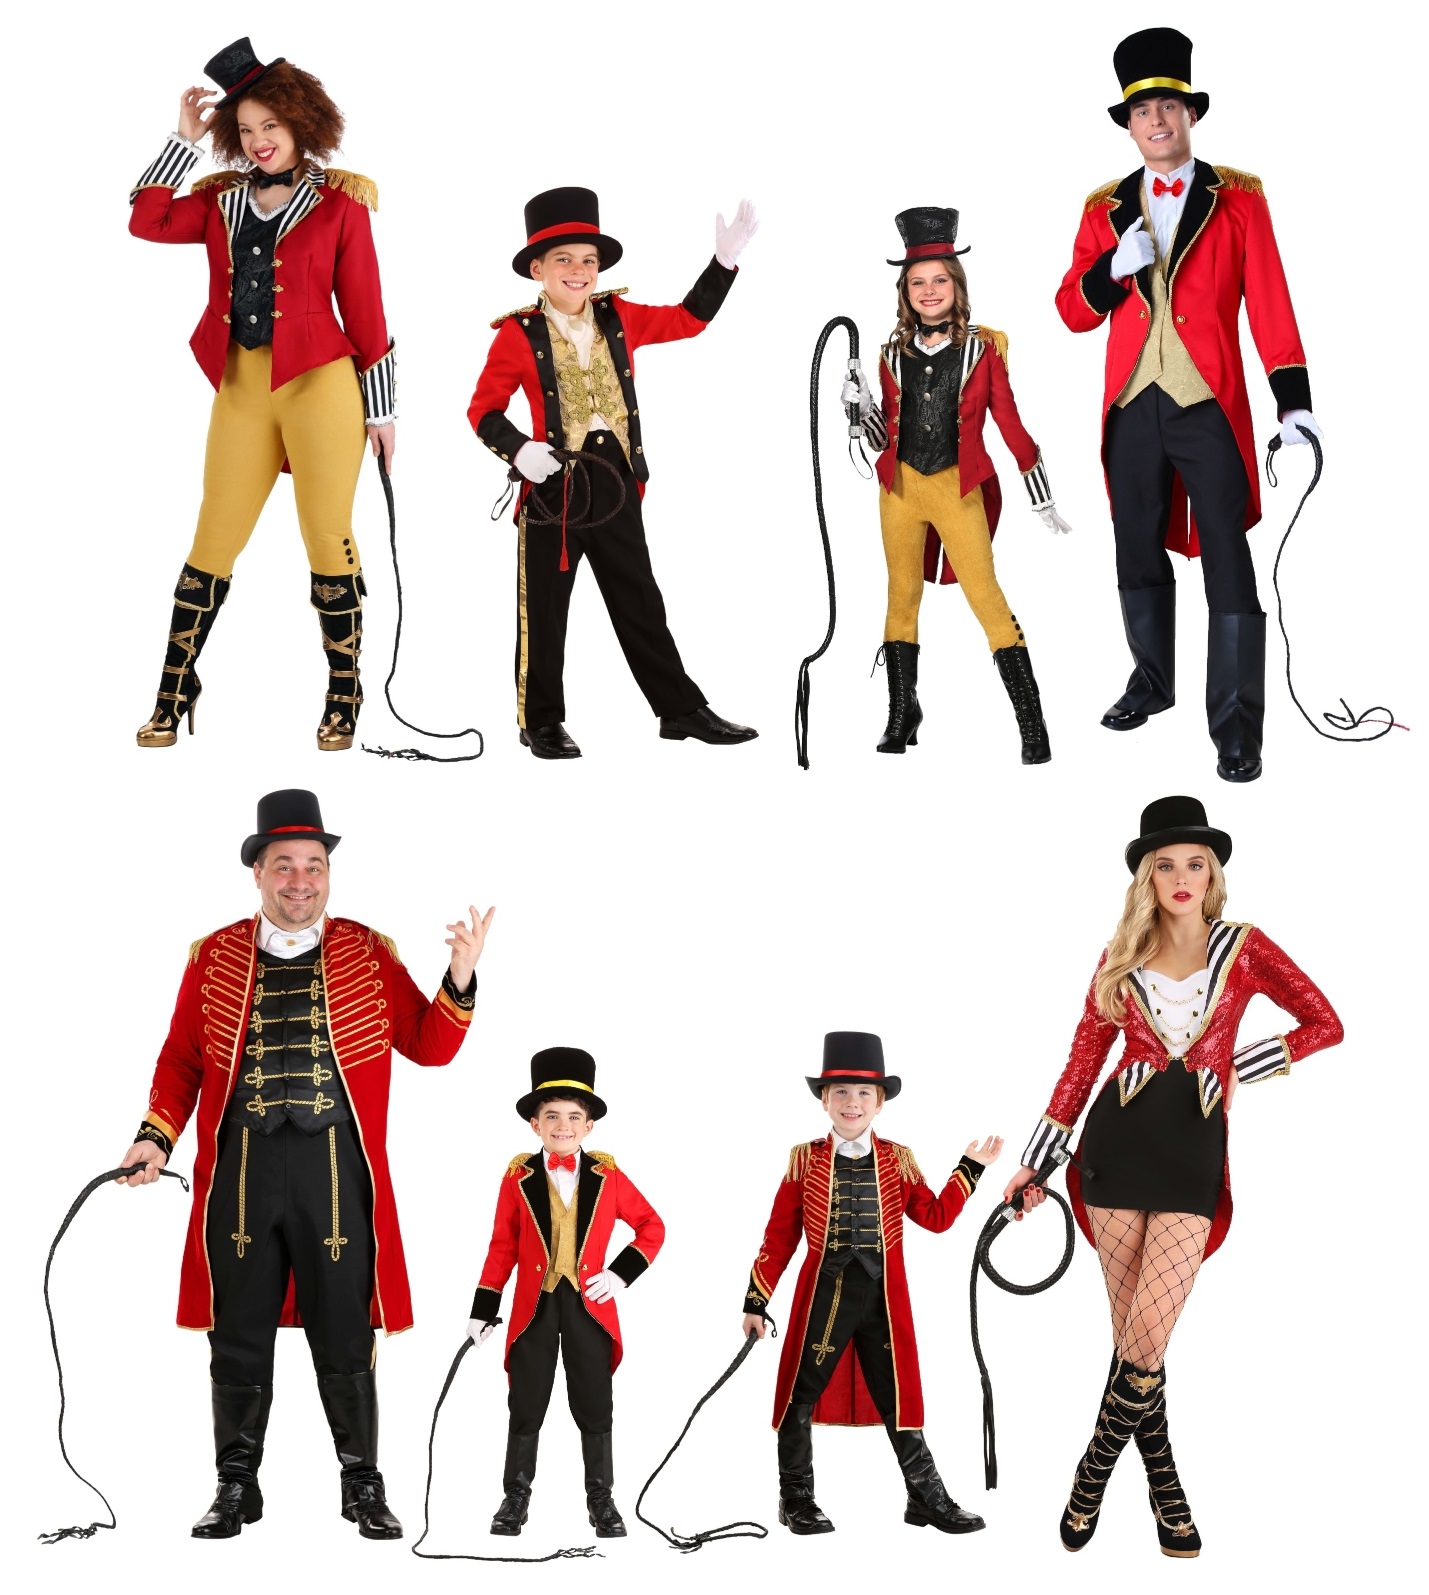 These 50+ Circus Costumes Will Give You All the Greatest Showman